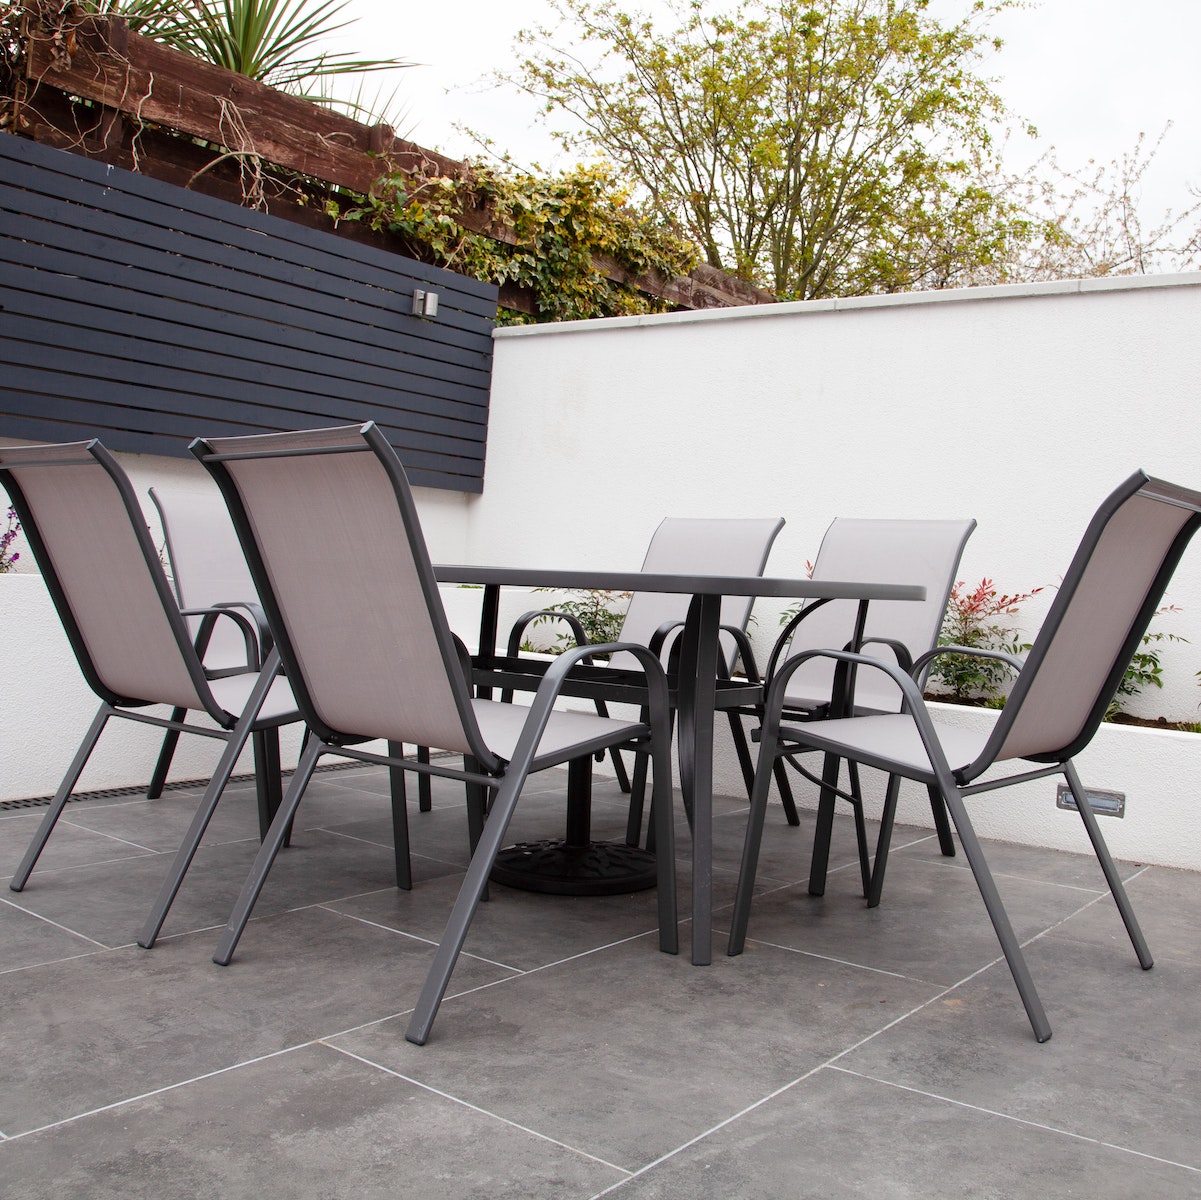 How to clean steel outdoor furniture